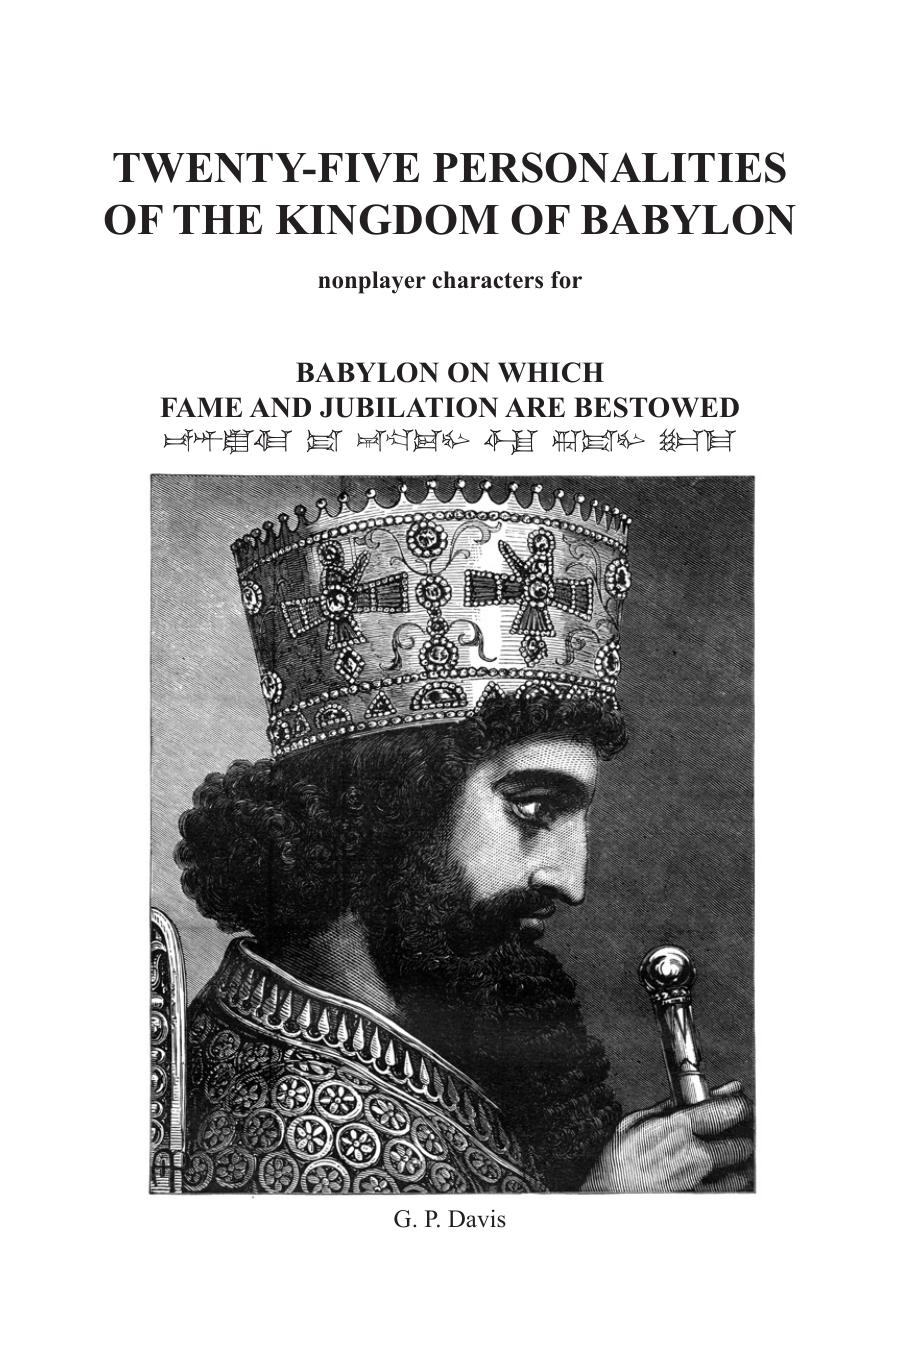 Babylon On Which Fame and Jubilation Are Bestowed 25 Personalities of the Kingdom of Babylon